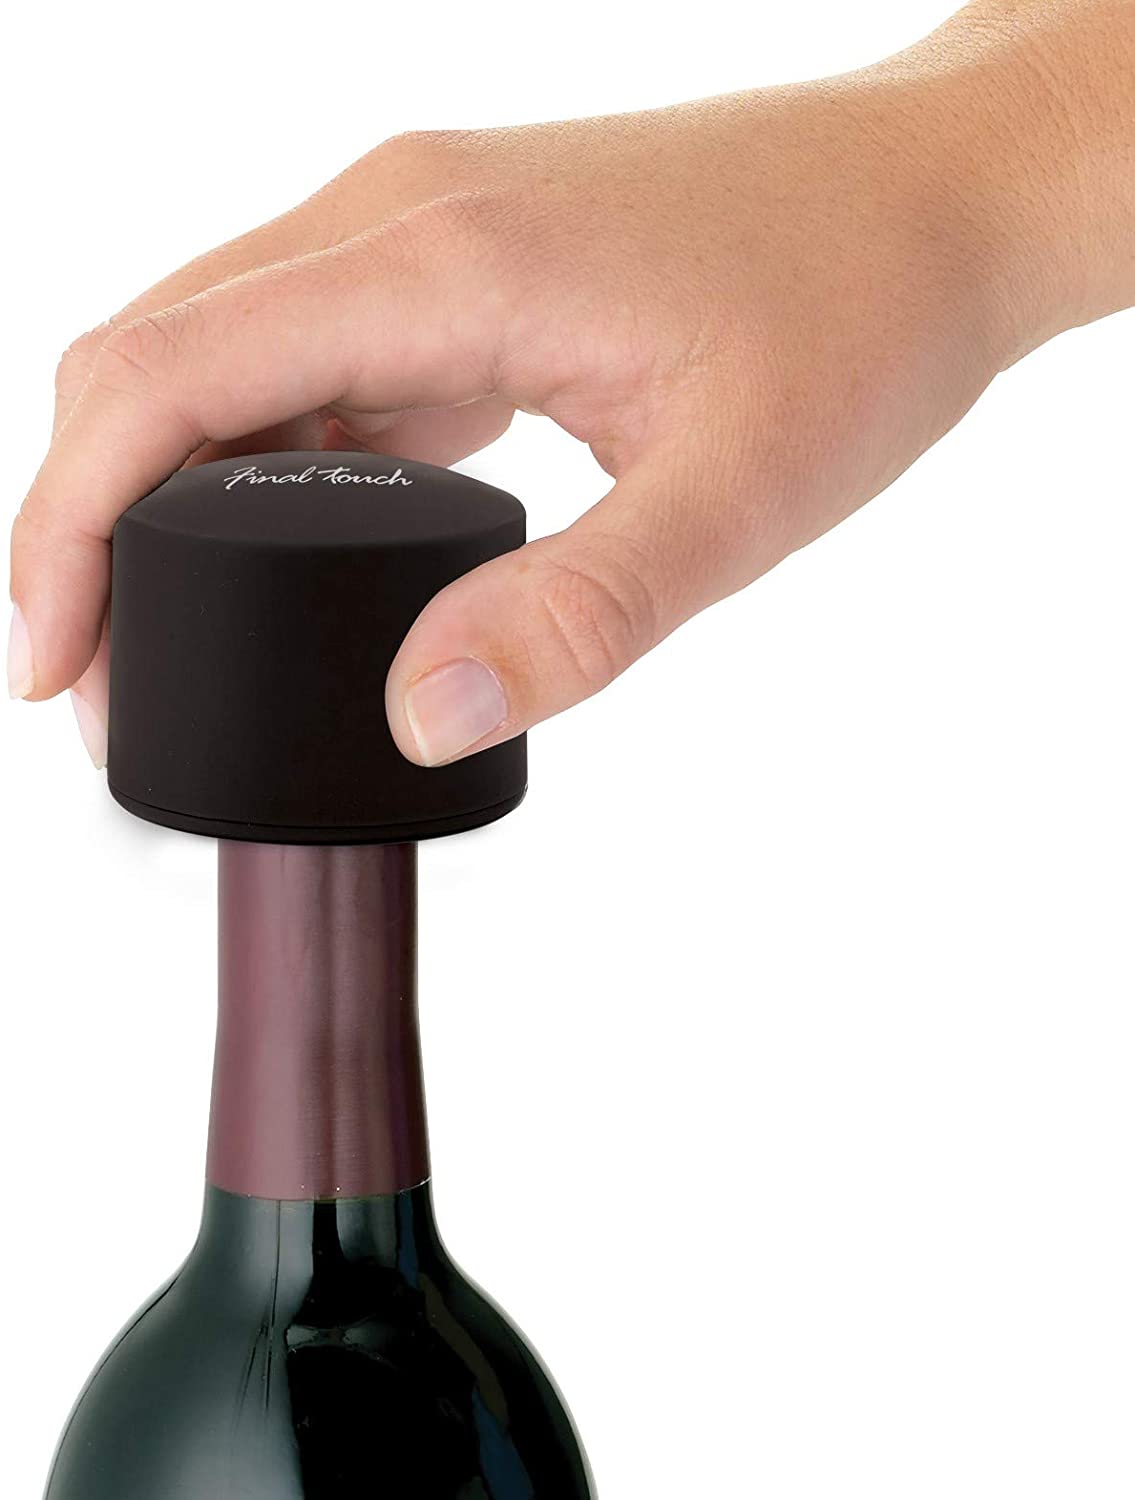 a person using the foil cutter on a wine bottle against a white background